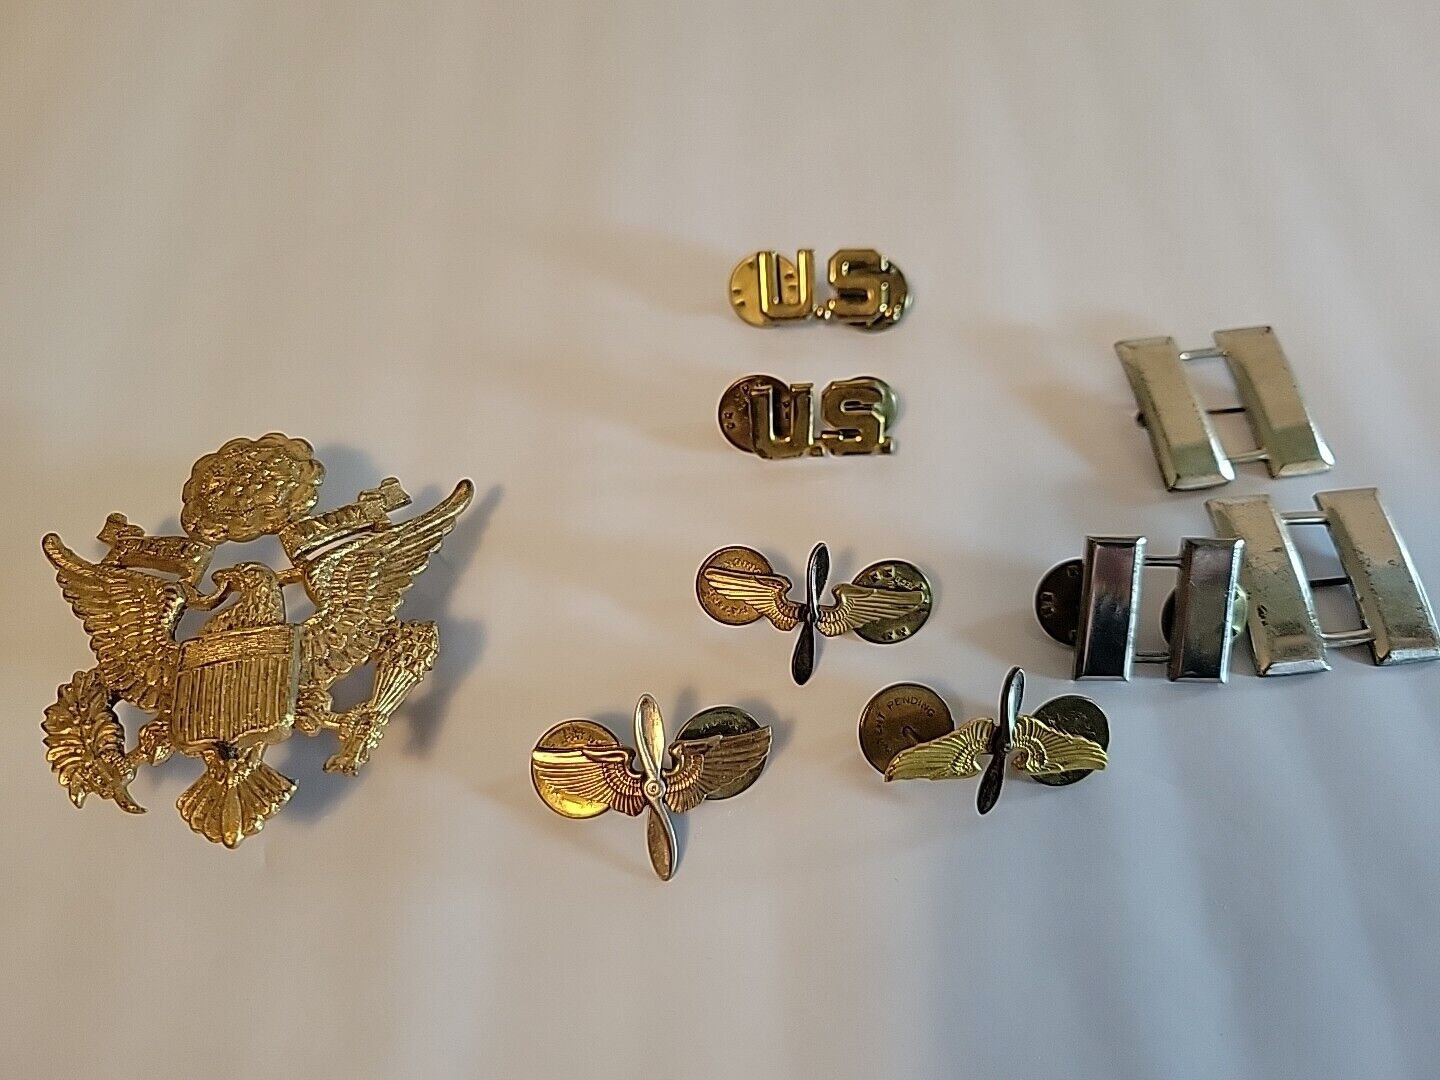 9 Vintage Item 1 Is US Air Force Military Officer Dress Cap Hat Badge Insignia +